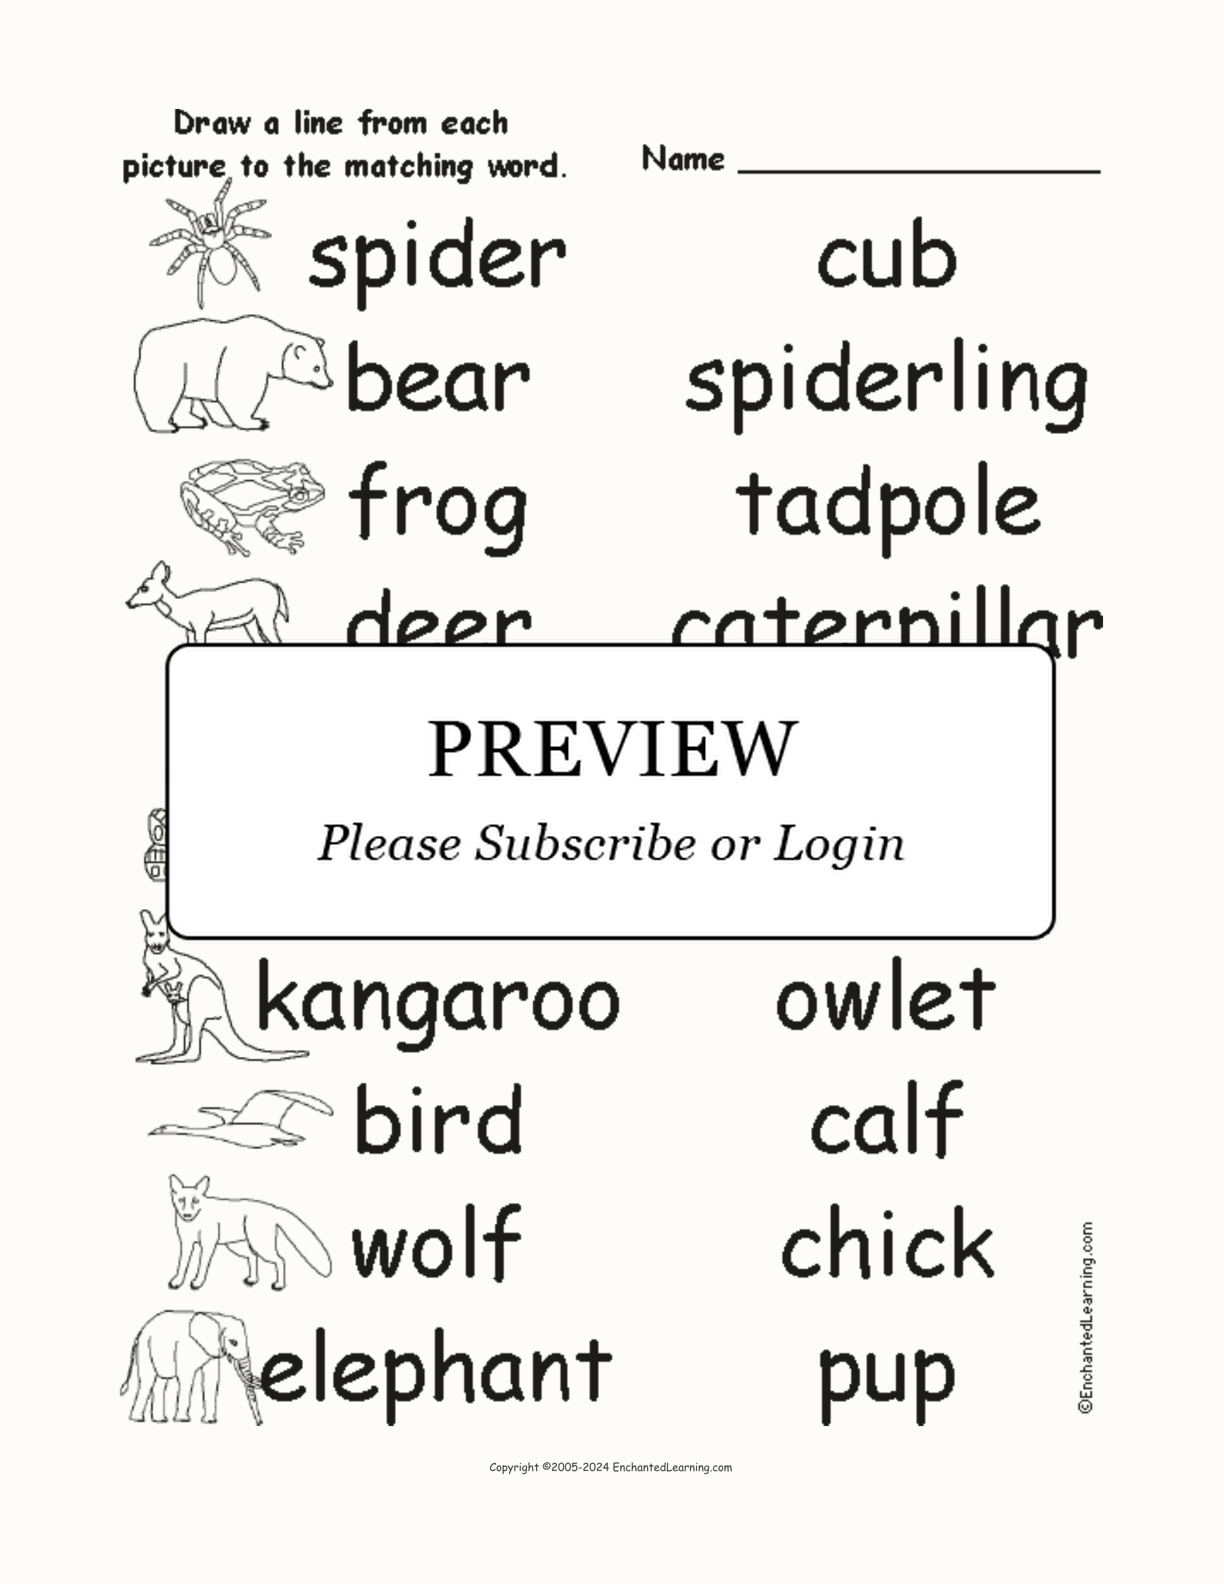 Animals and Babies - Match the Words to the Pictures - Enchanted Learning